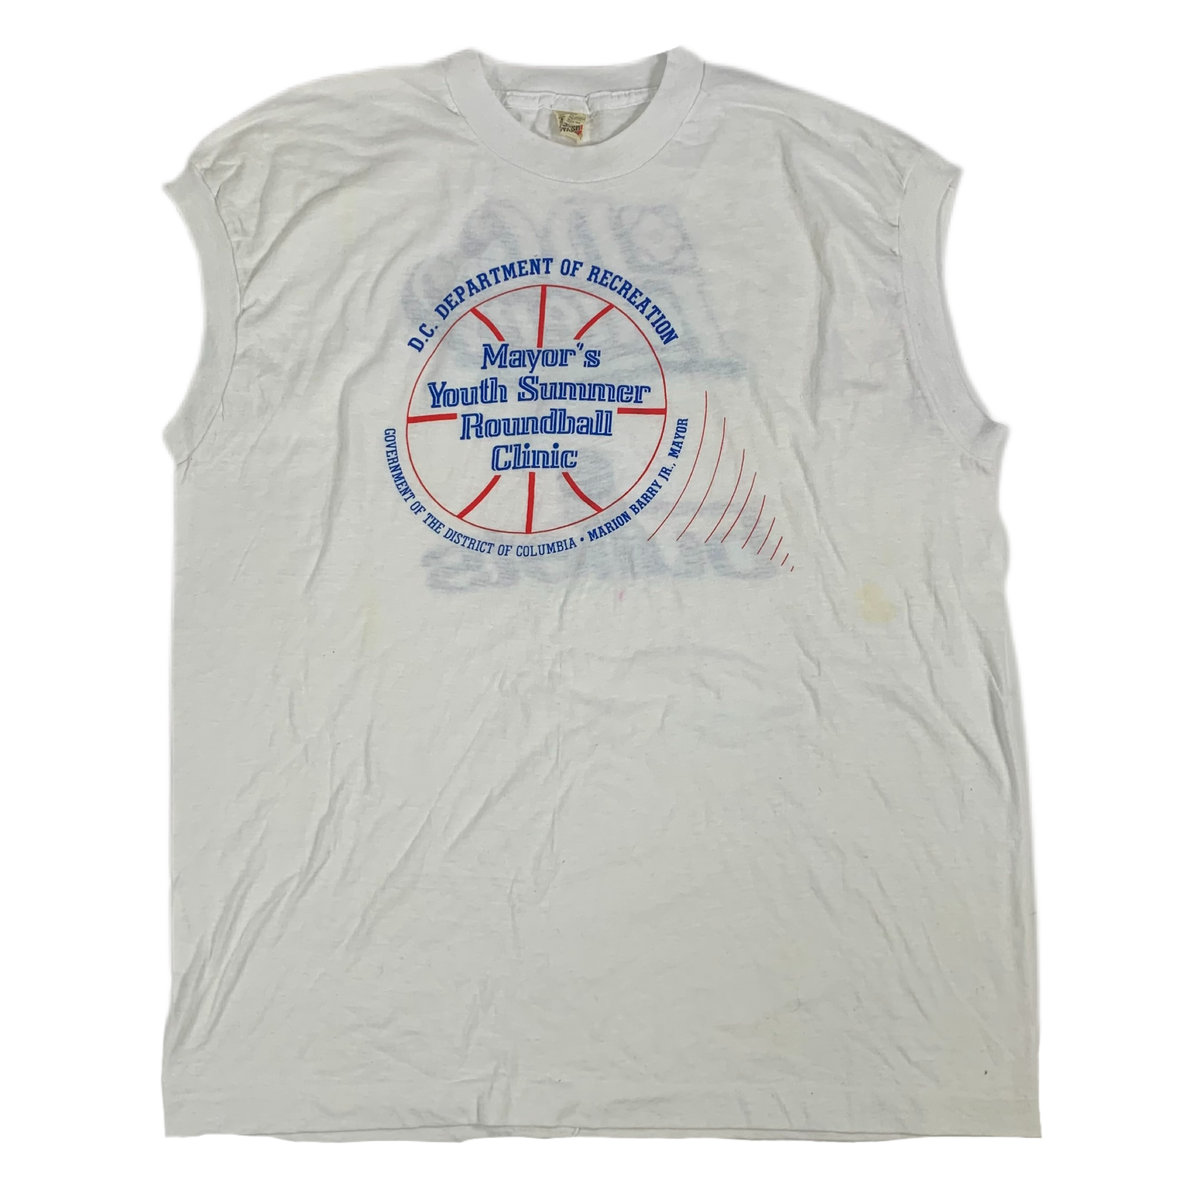 Vintage Marion Barry &quot;Youth Summer Roundball Clinic&quot; Sleeveless T-Shirt